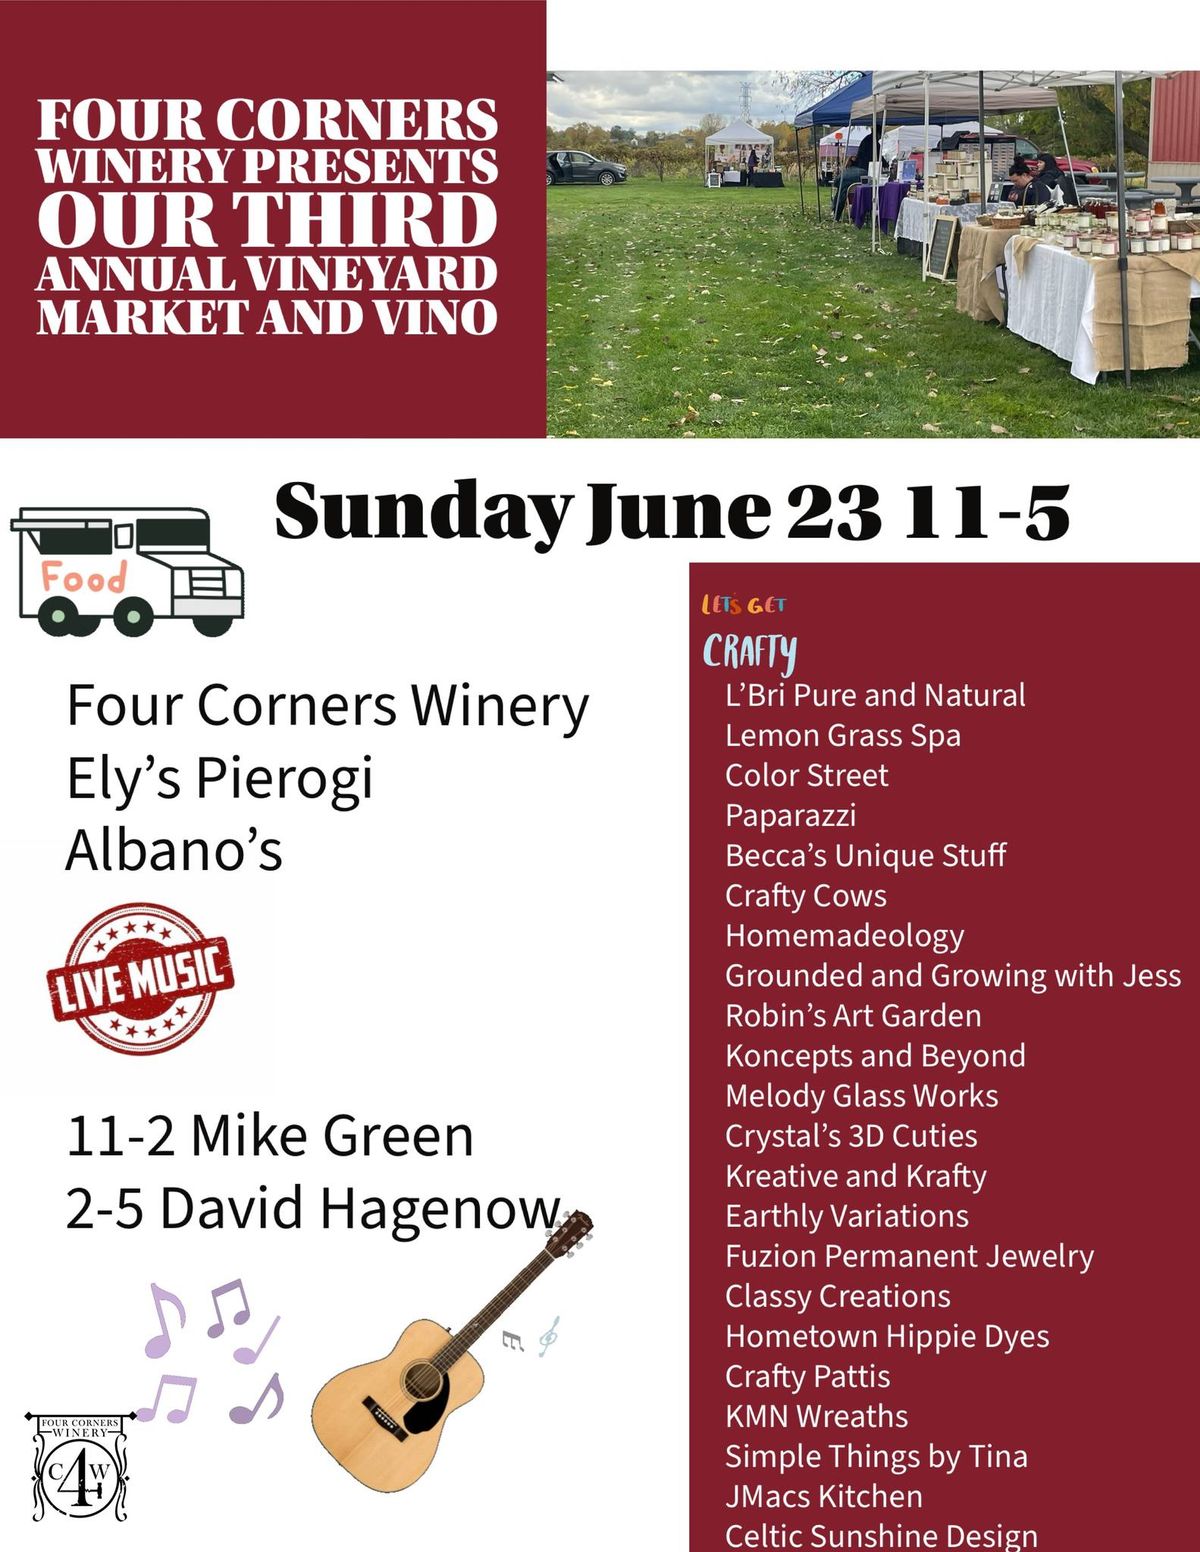 Four Corners Winery presents our Third Annual Vintage Market and Vino